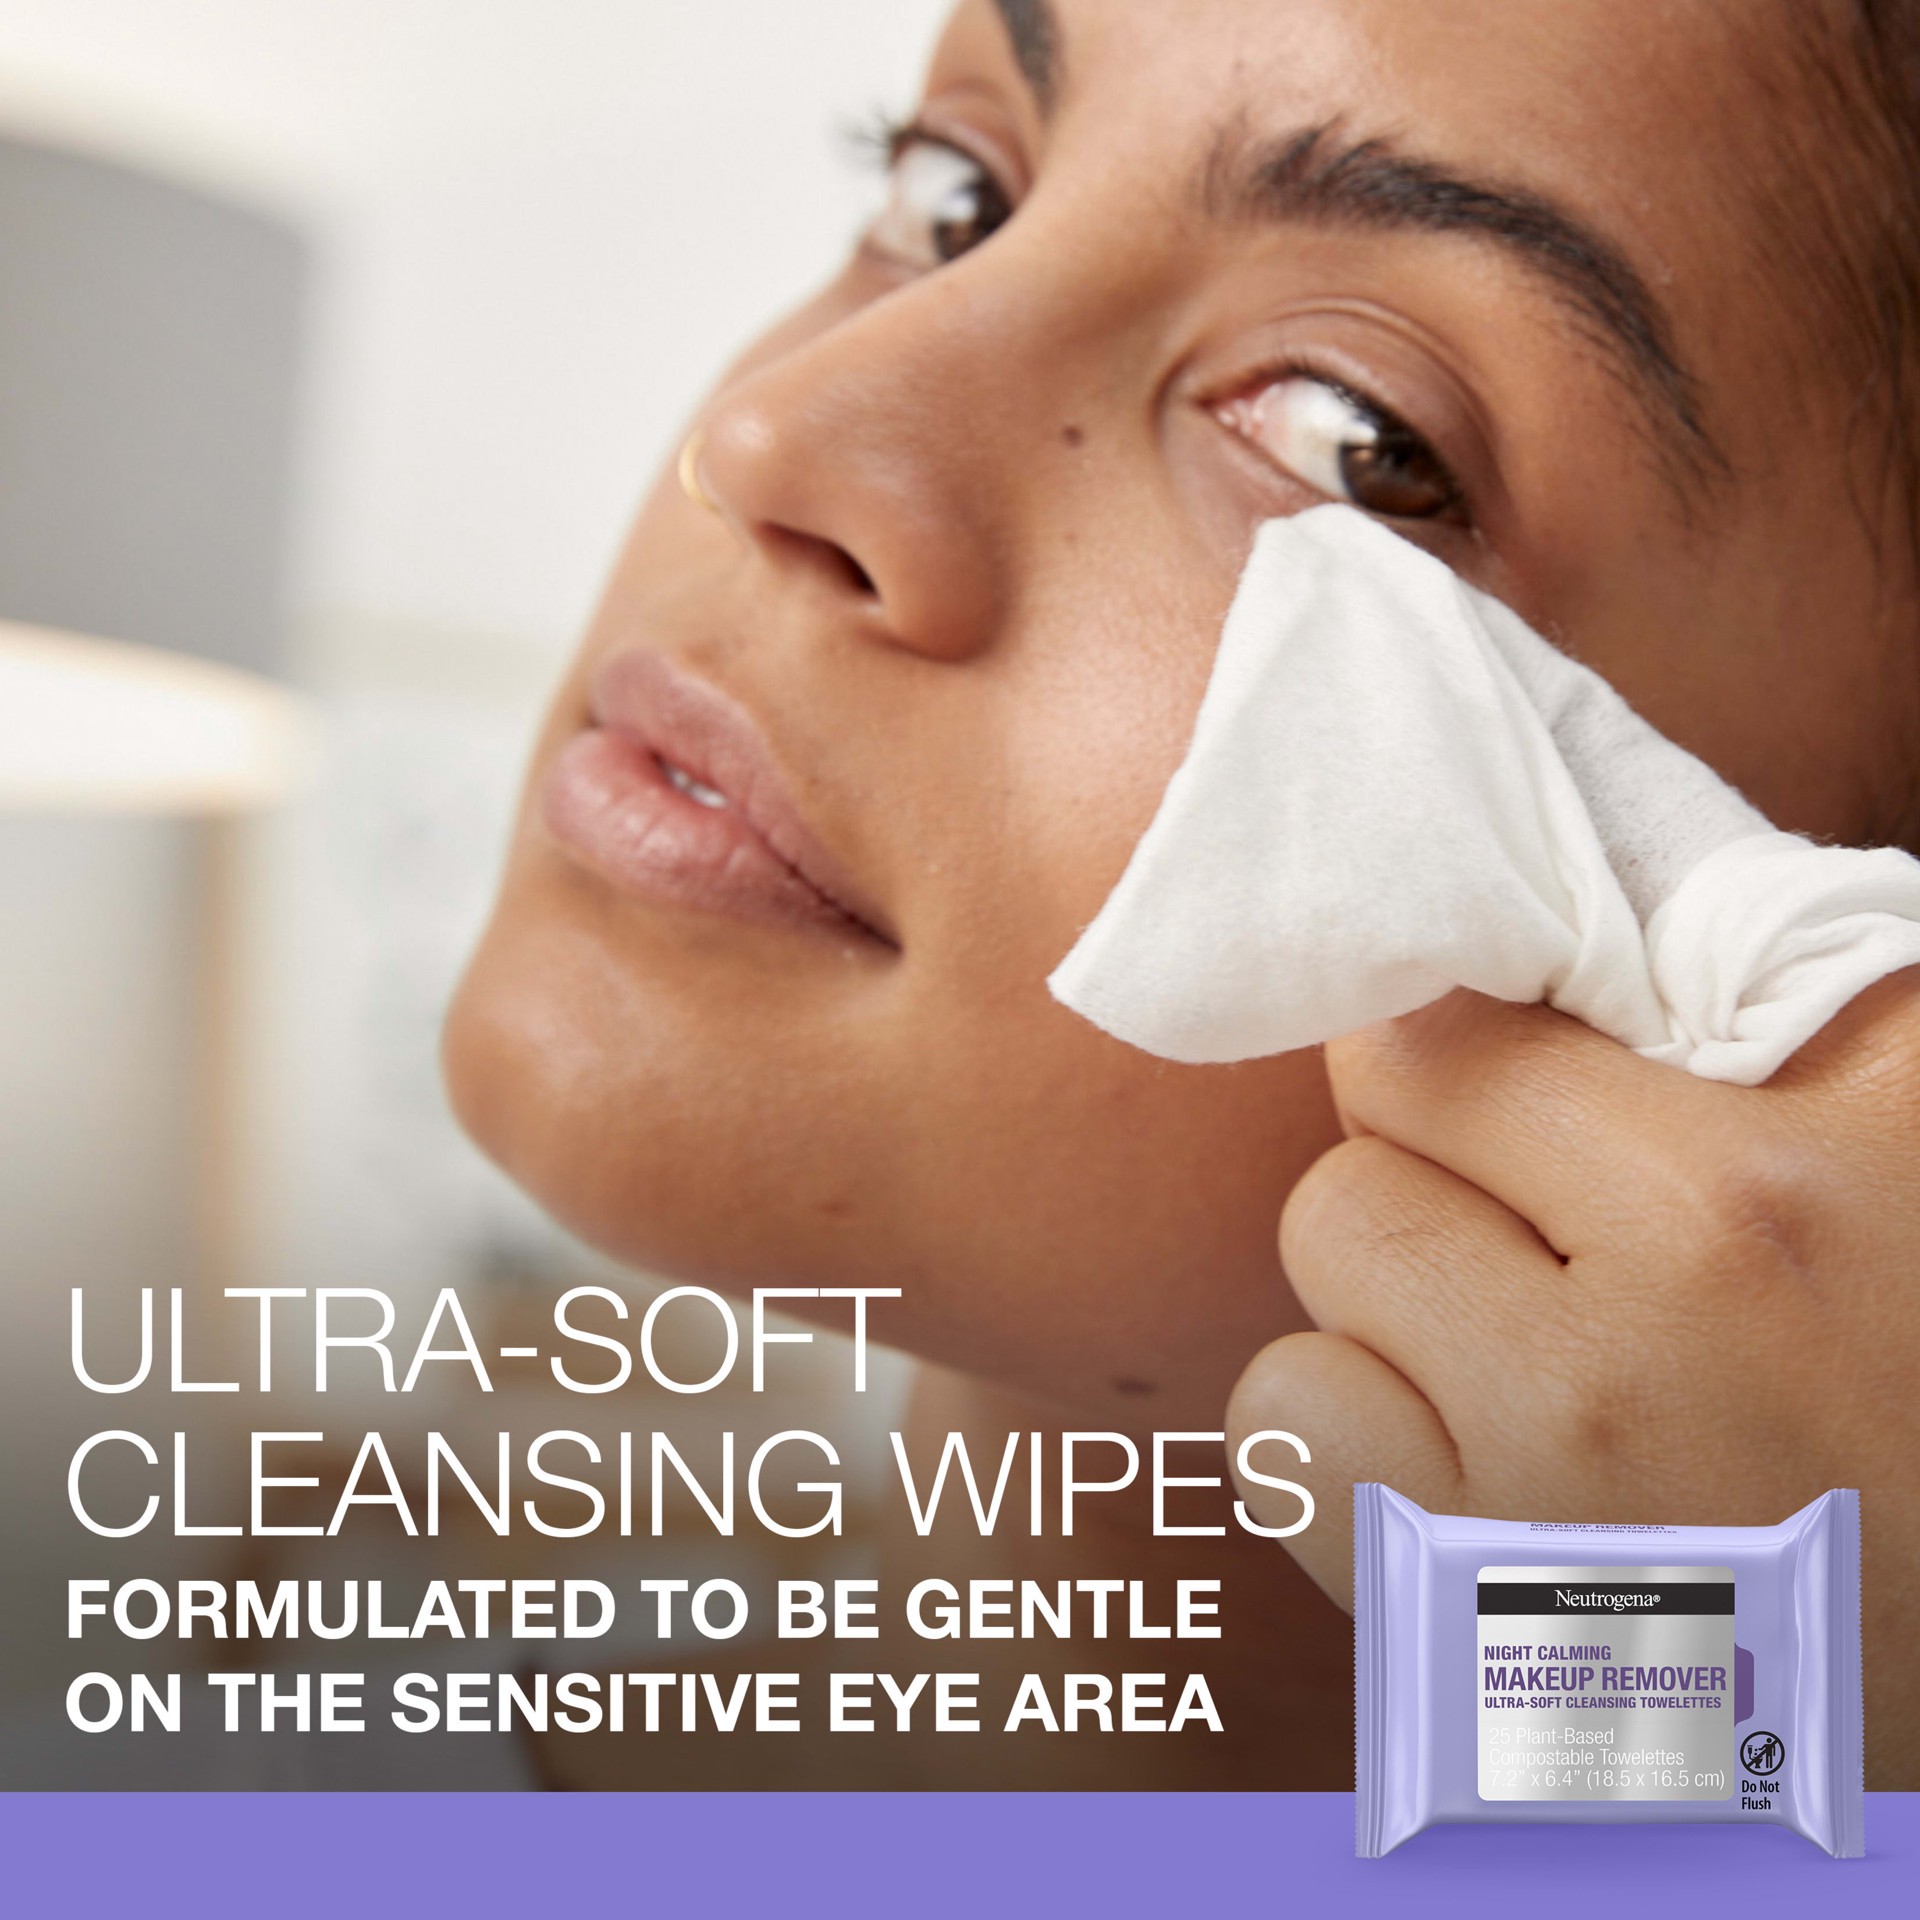 slide 5 of 9, Neutrogena Facial Cleansing Makeup Remover Night Calming Cleansing Wipes - 25ct, 25 ct